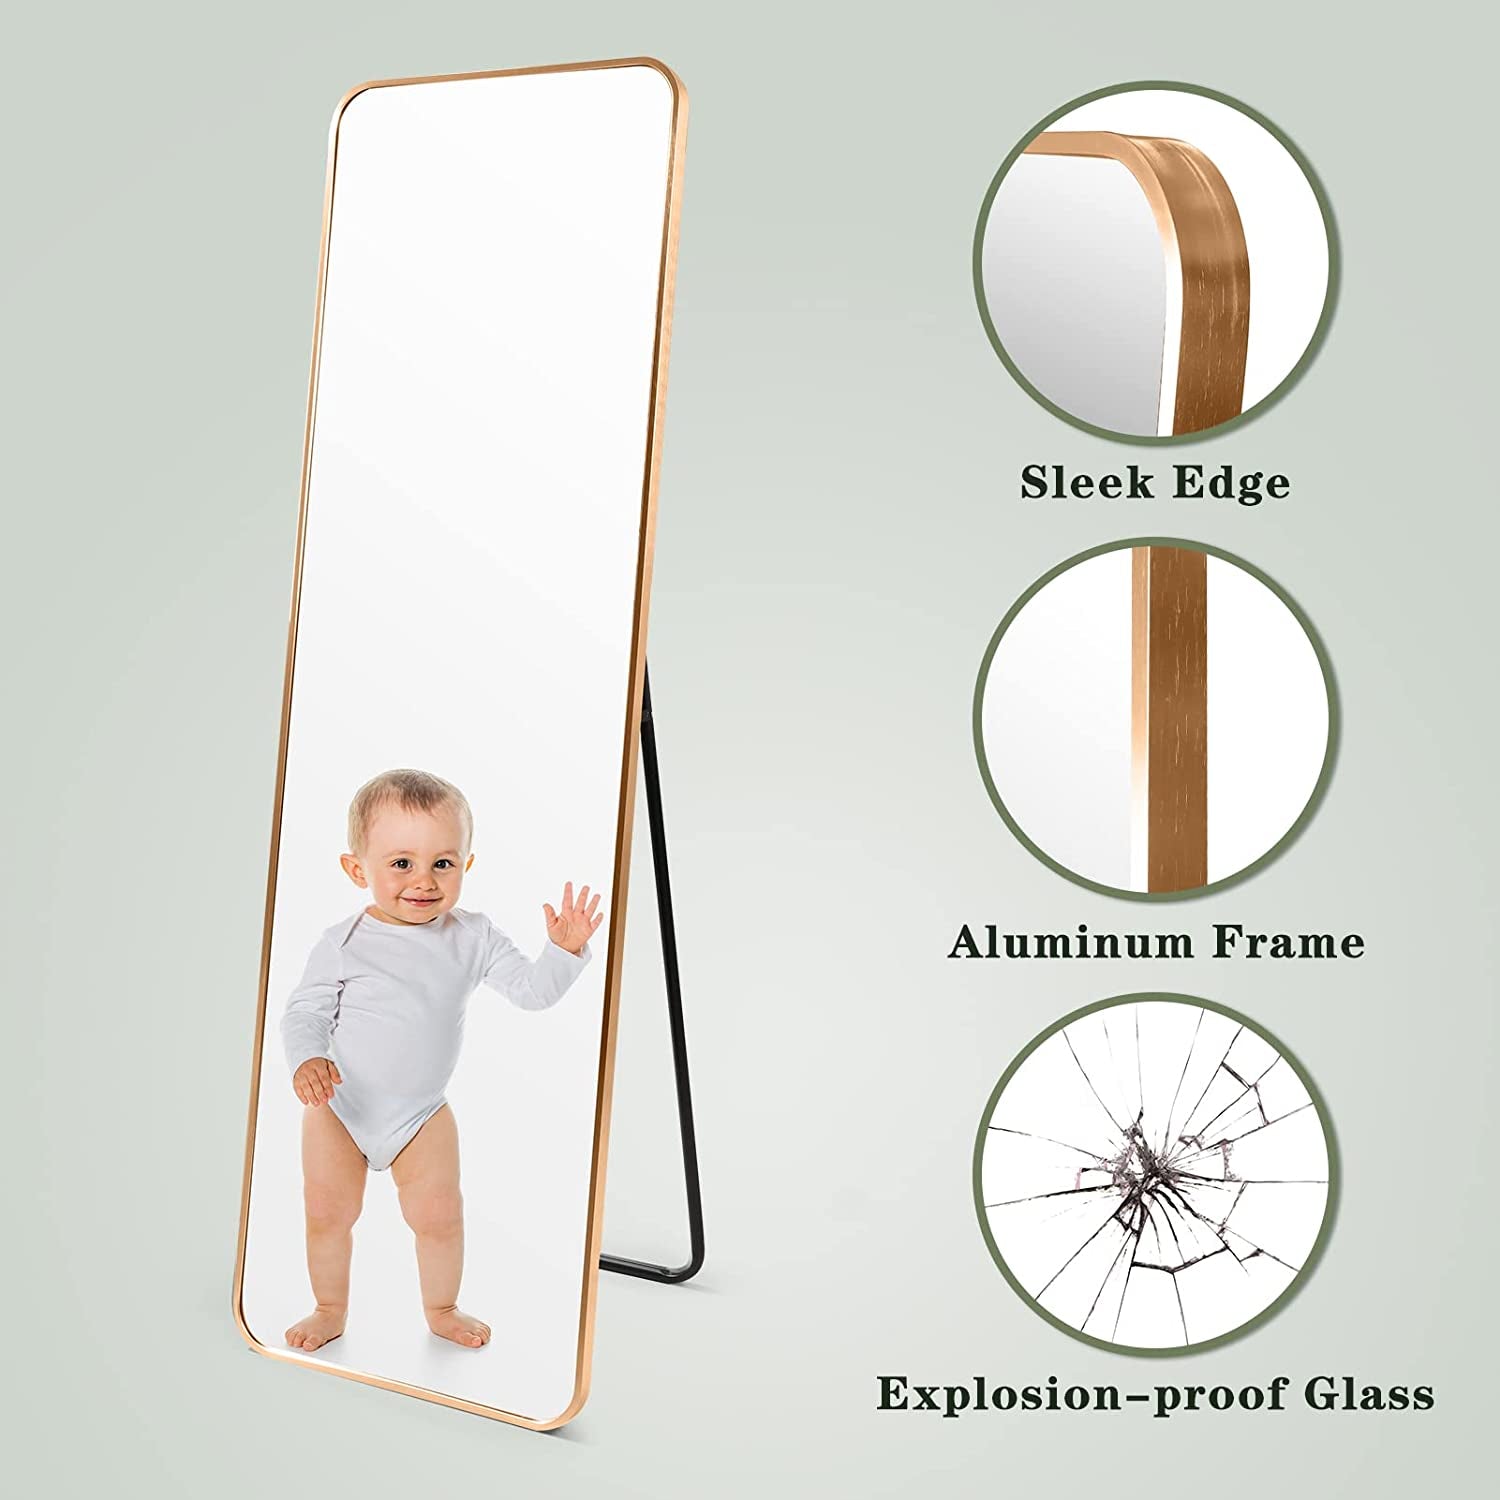 Gold Full Length Floor Mirror with Aluminum Frame for Wall Mounted,  Standing, Leaning, 60X18 Full Body Large Mirror for Dressing Room,  Bedroom